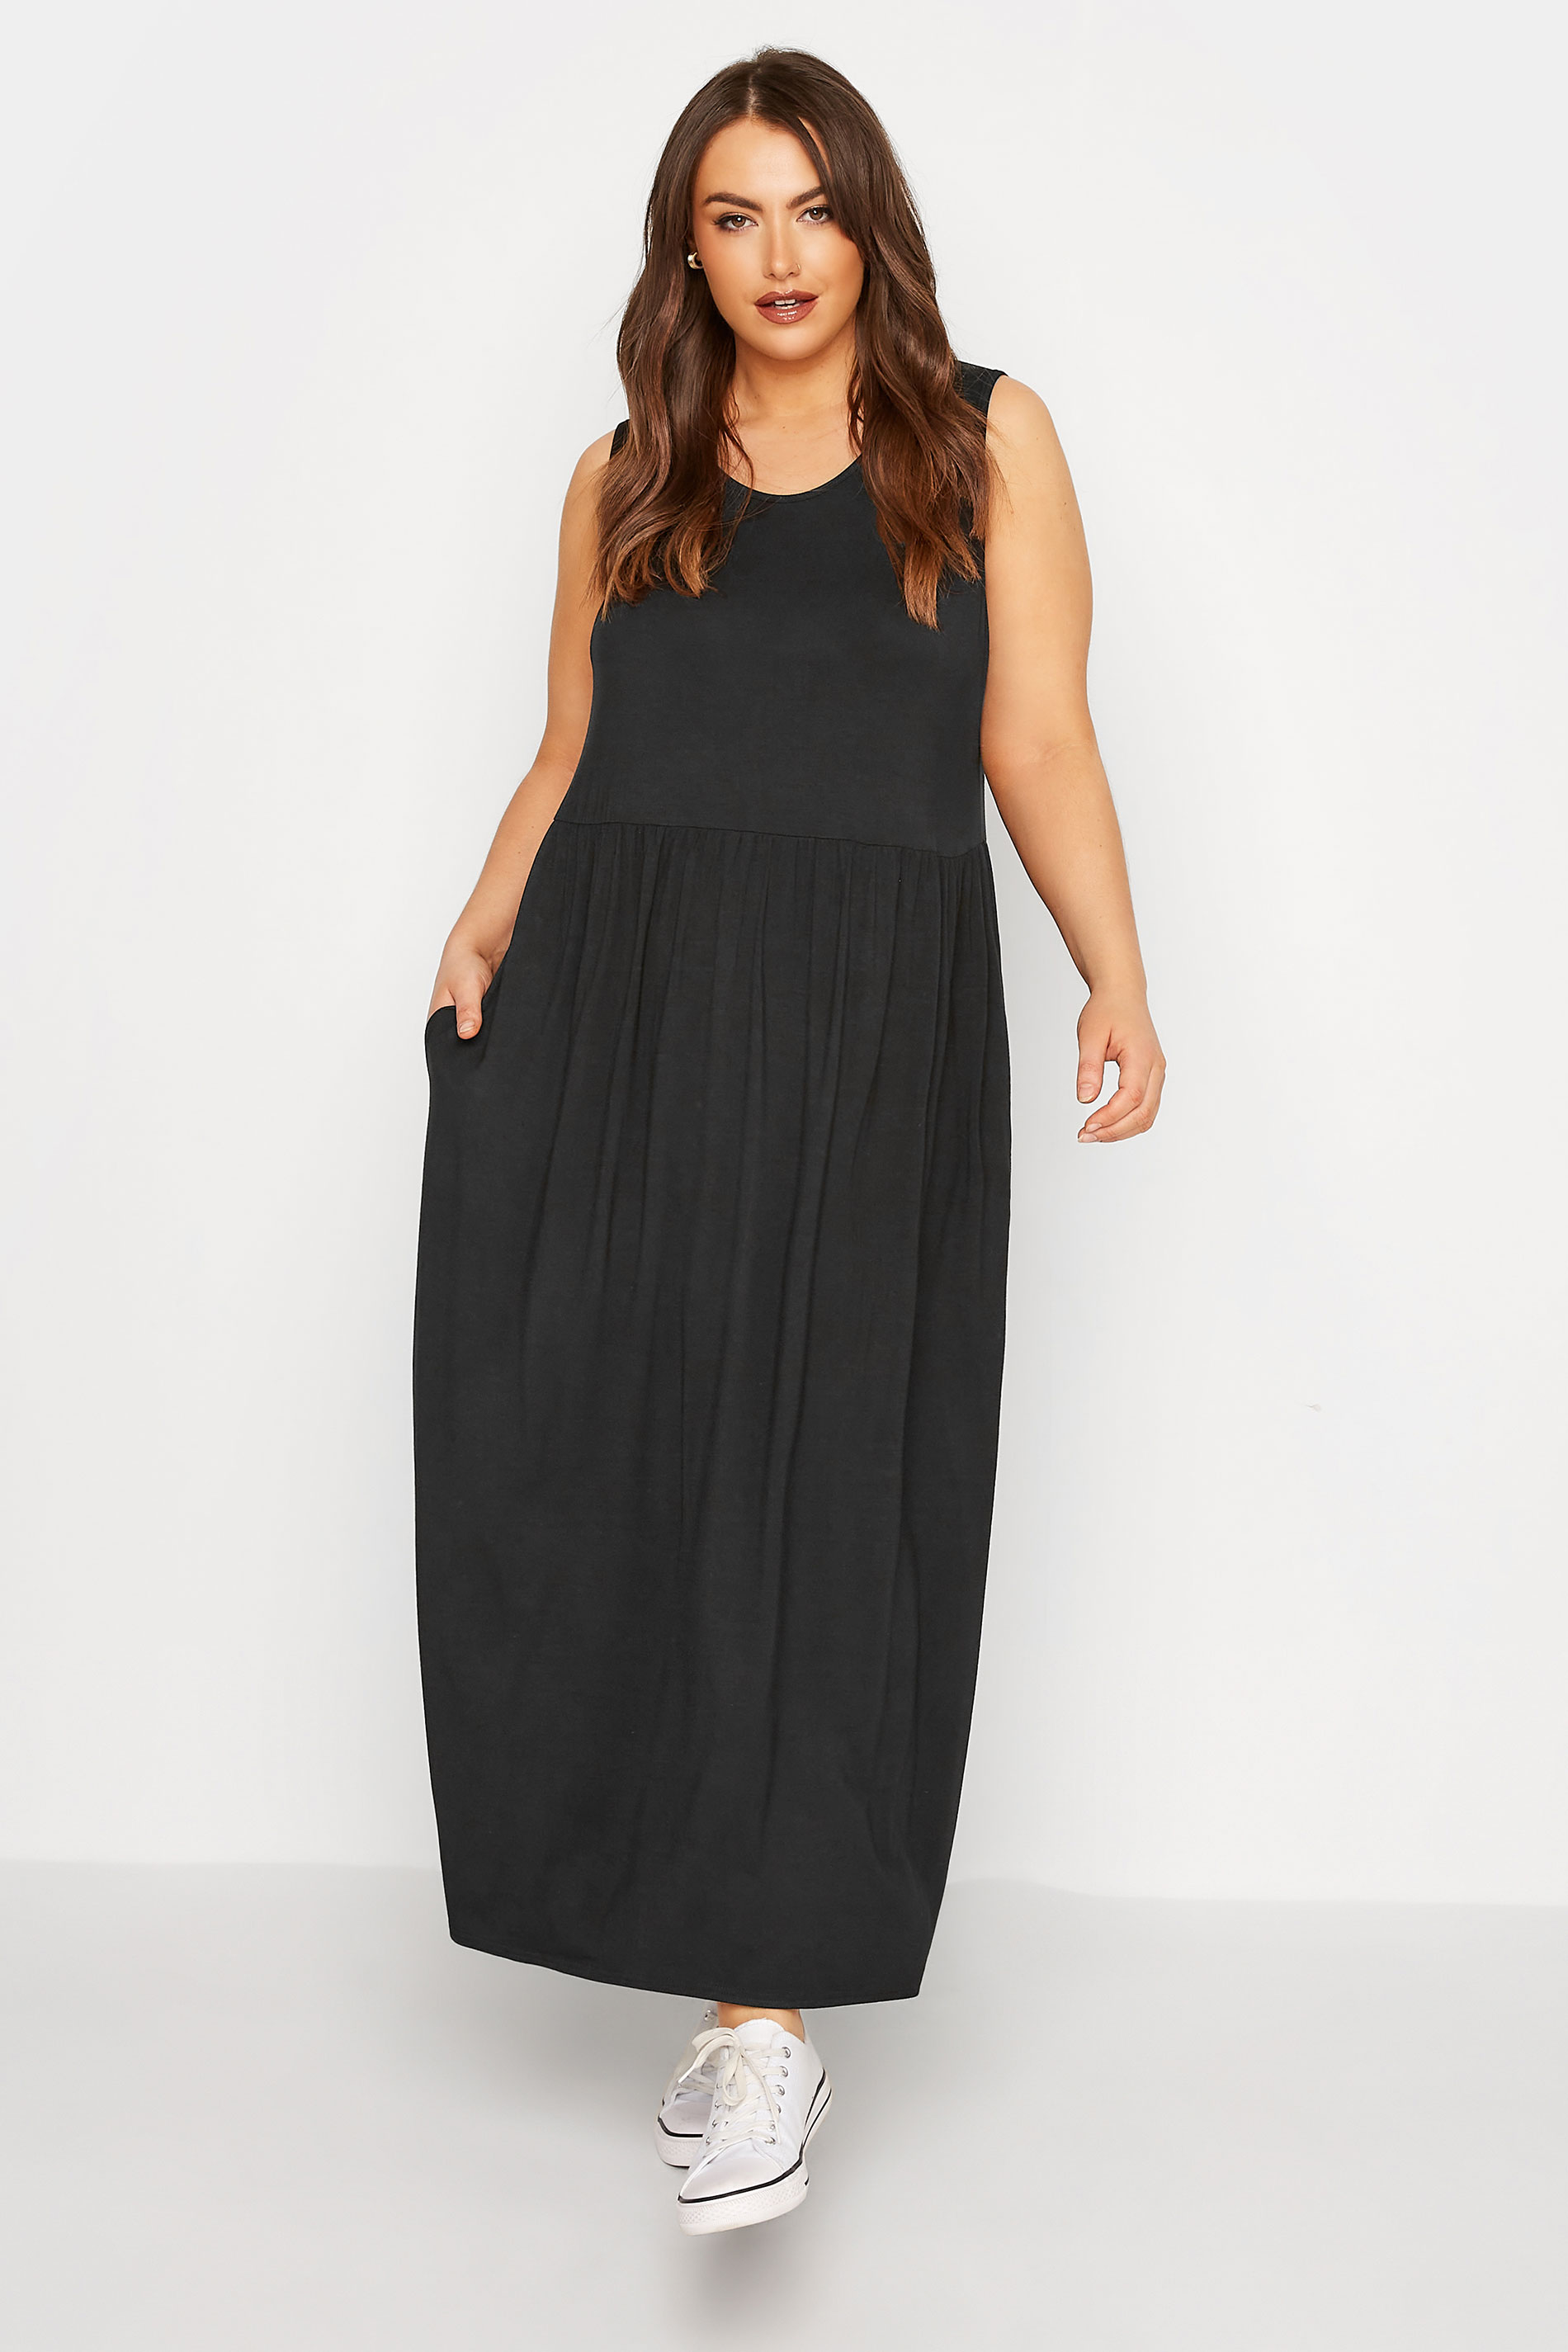 Robes Grande Taille Grande taille  Robes Longues | LIMITED COLLECTION - Robe Noire Maxi à Poches - ED72674